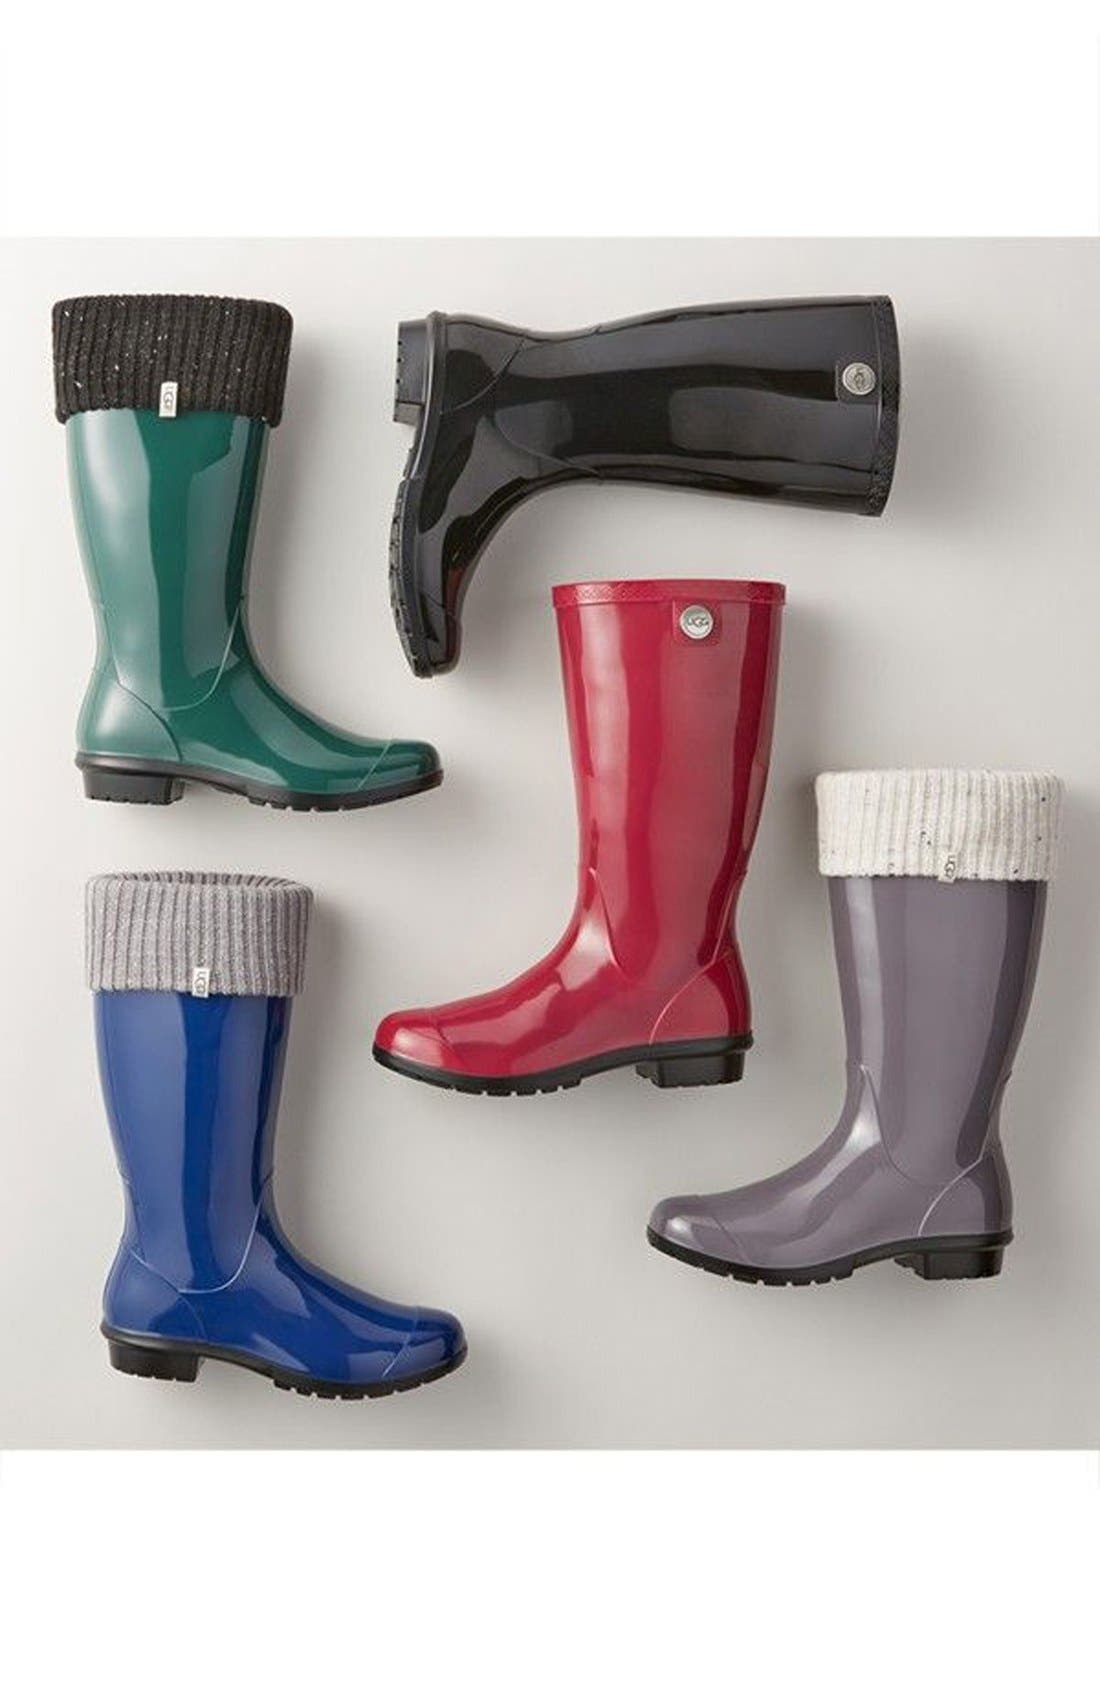 rain boots at nordstrom